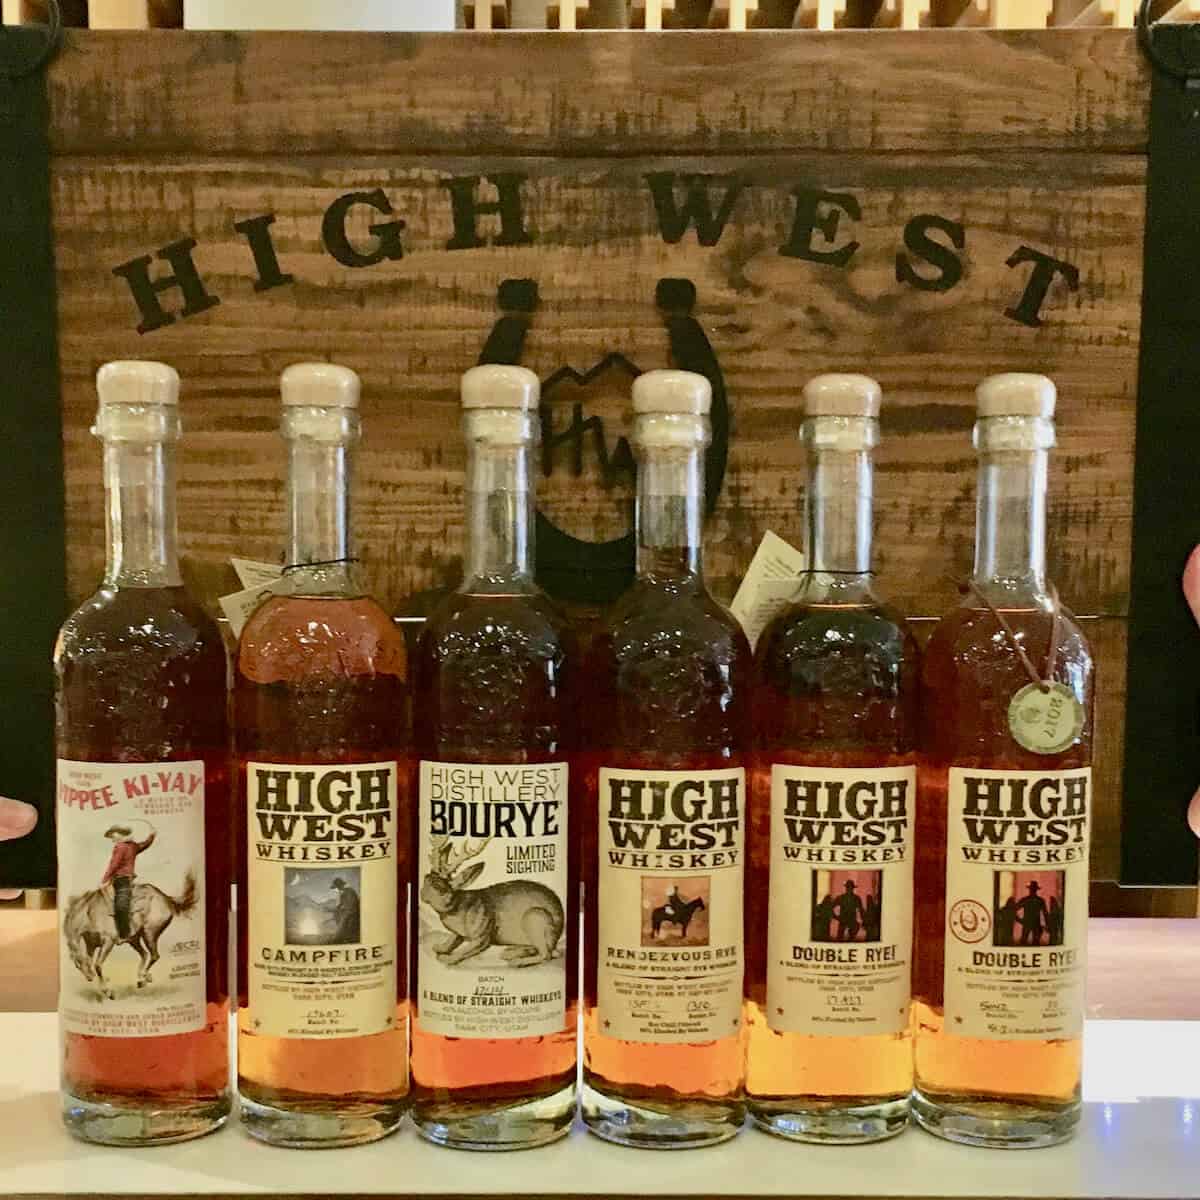 High West Rye whiskey bottle lineup in front of wooden sign on a counter.